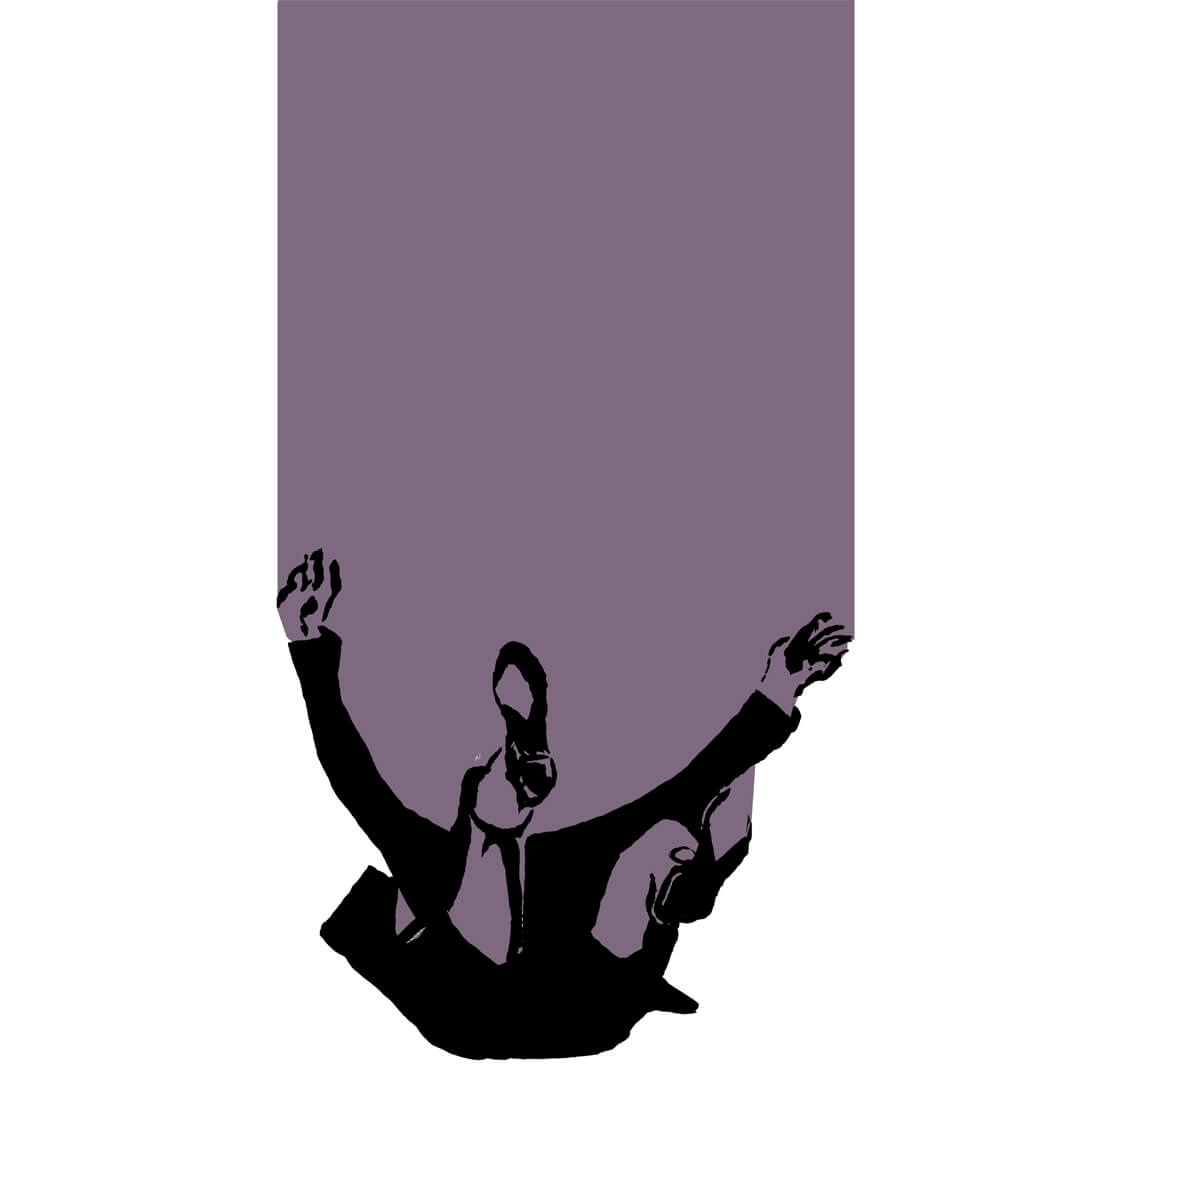 Abstract artwork of a man's silhouette falling through empty space with a purple background